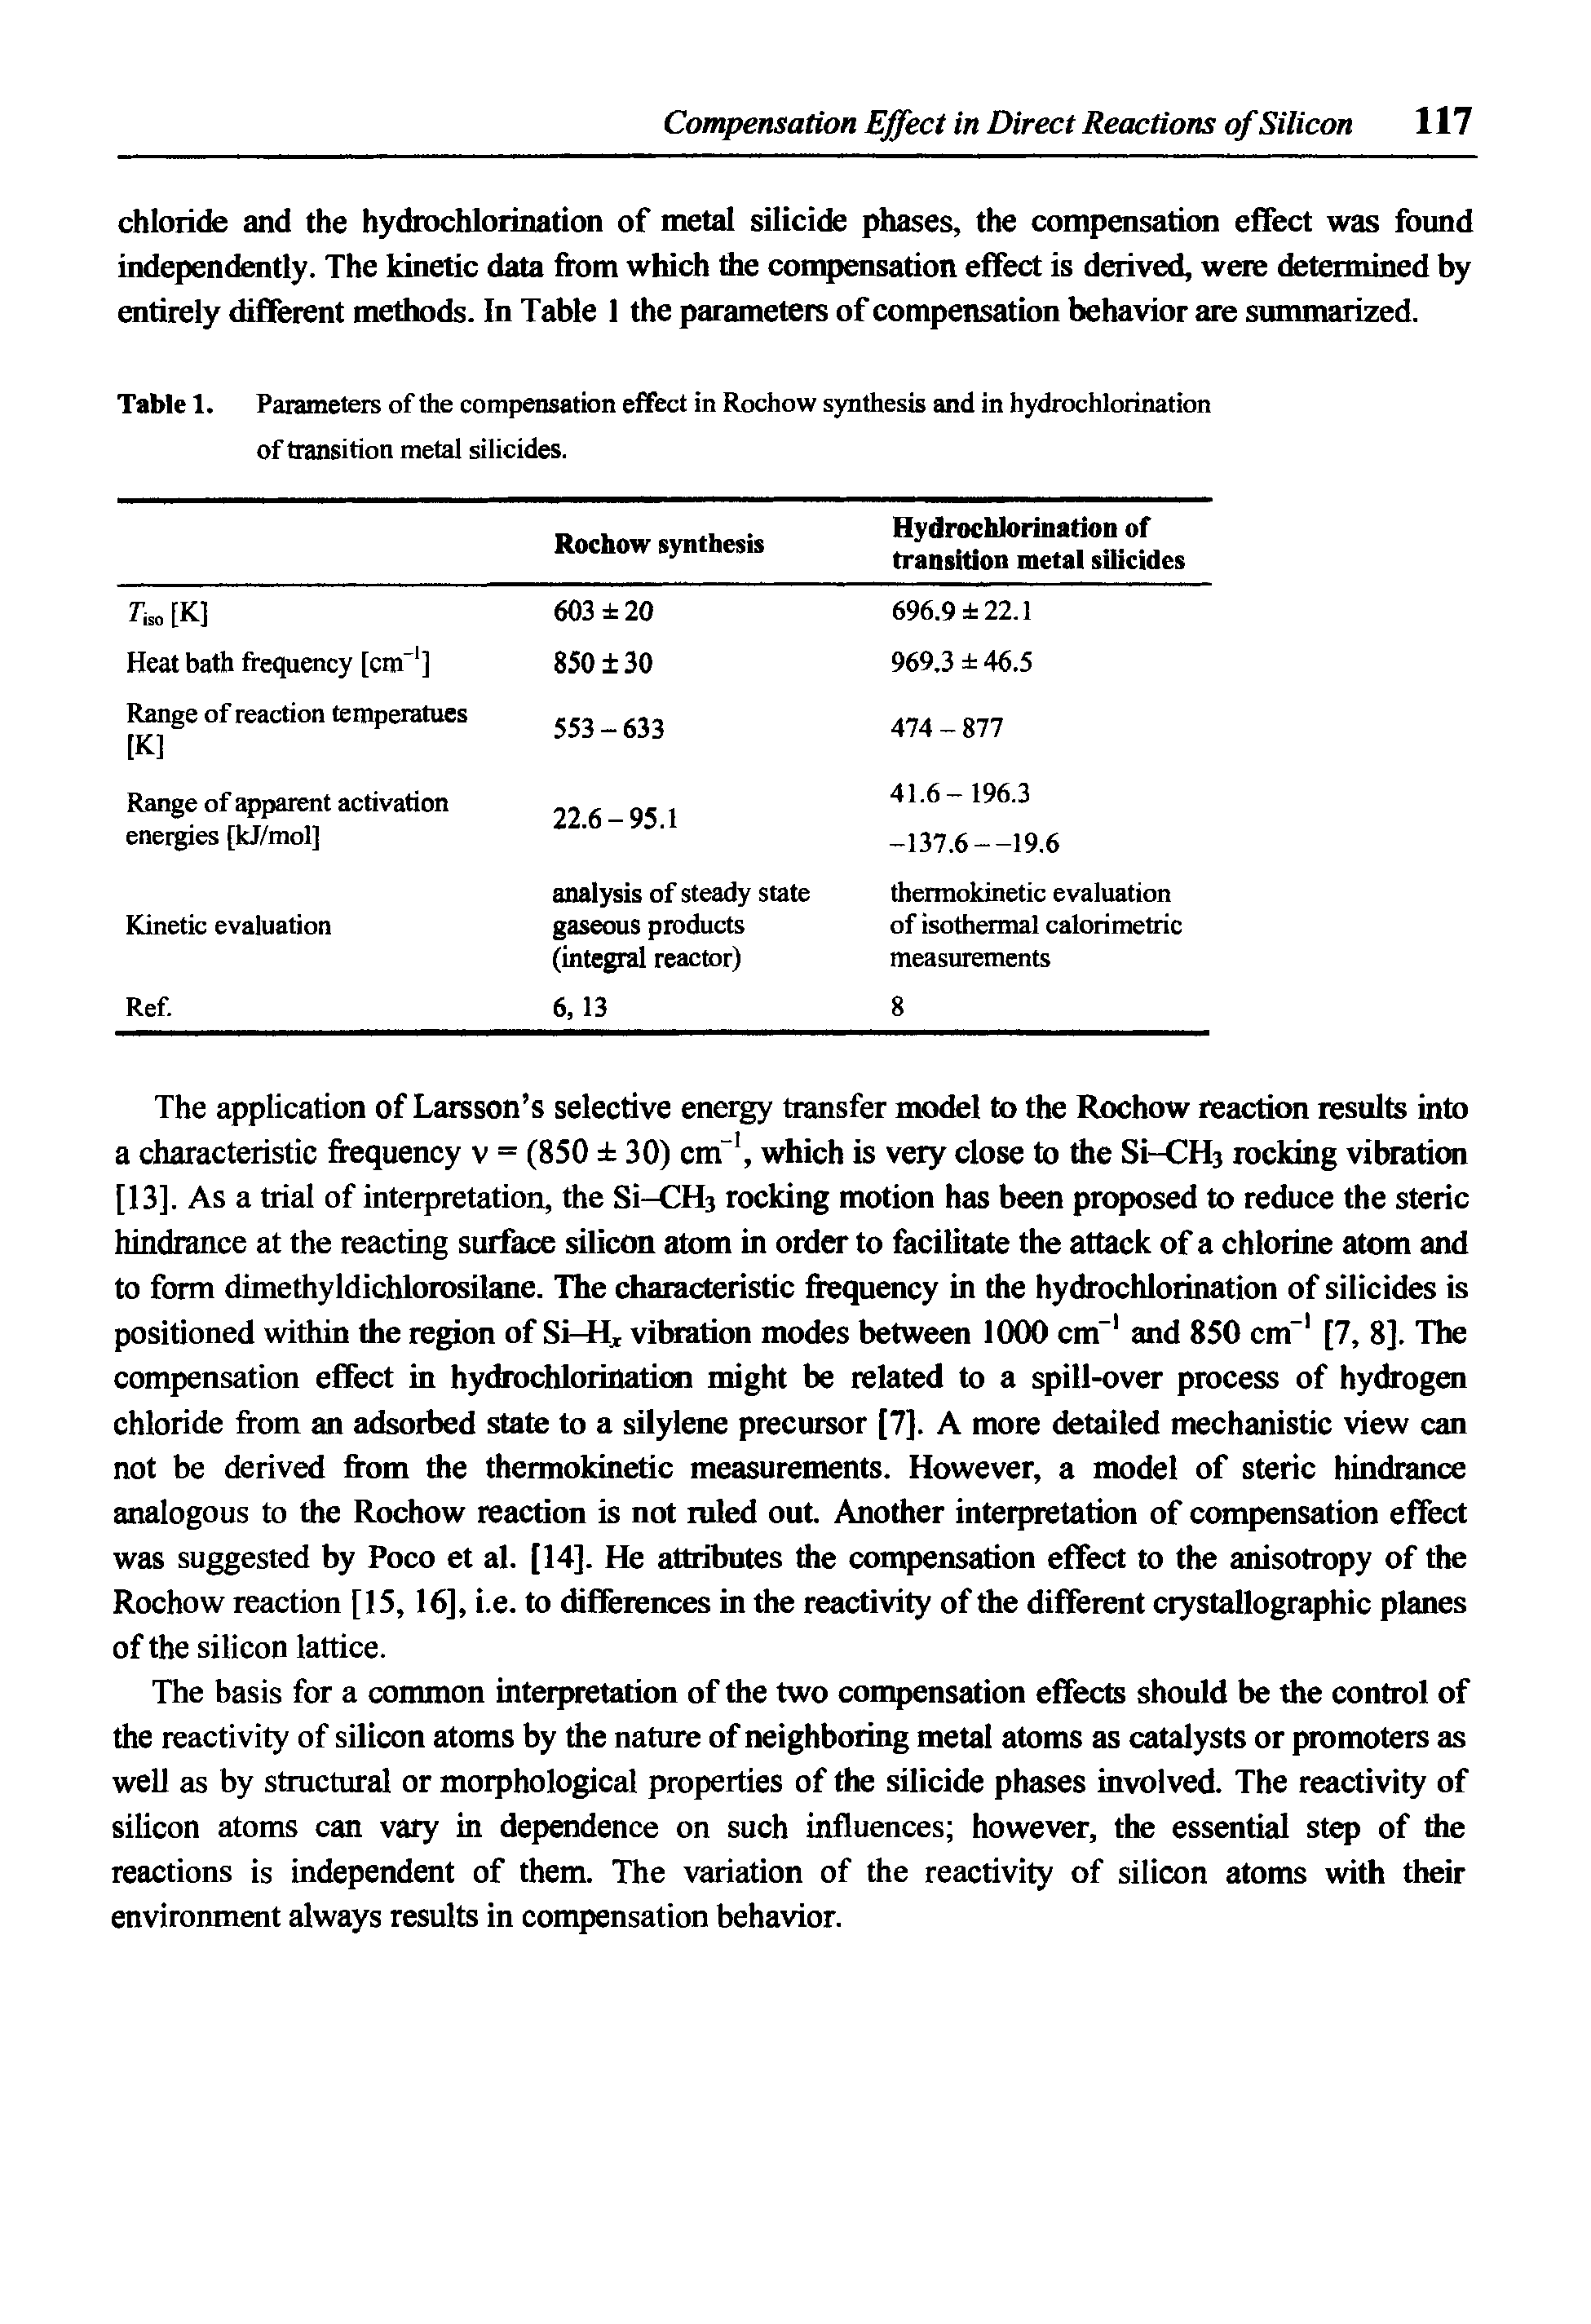 Table 1. Parameters of the compensation effect in Rochow synthesis and in hydrochlorination...